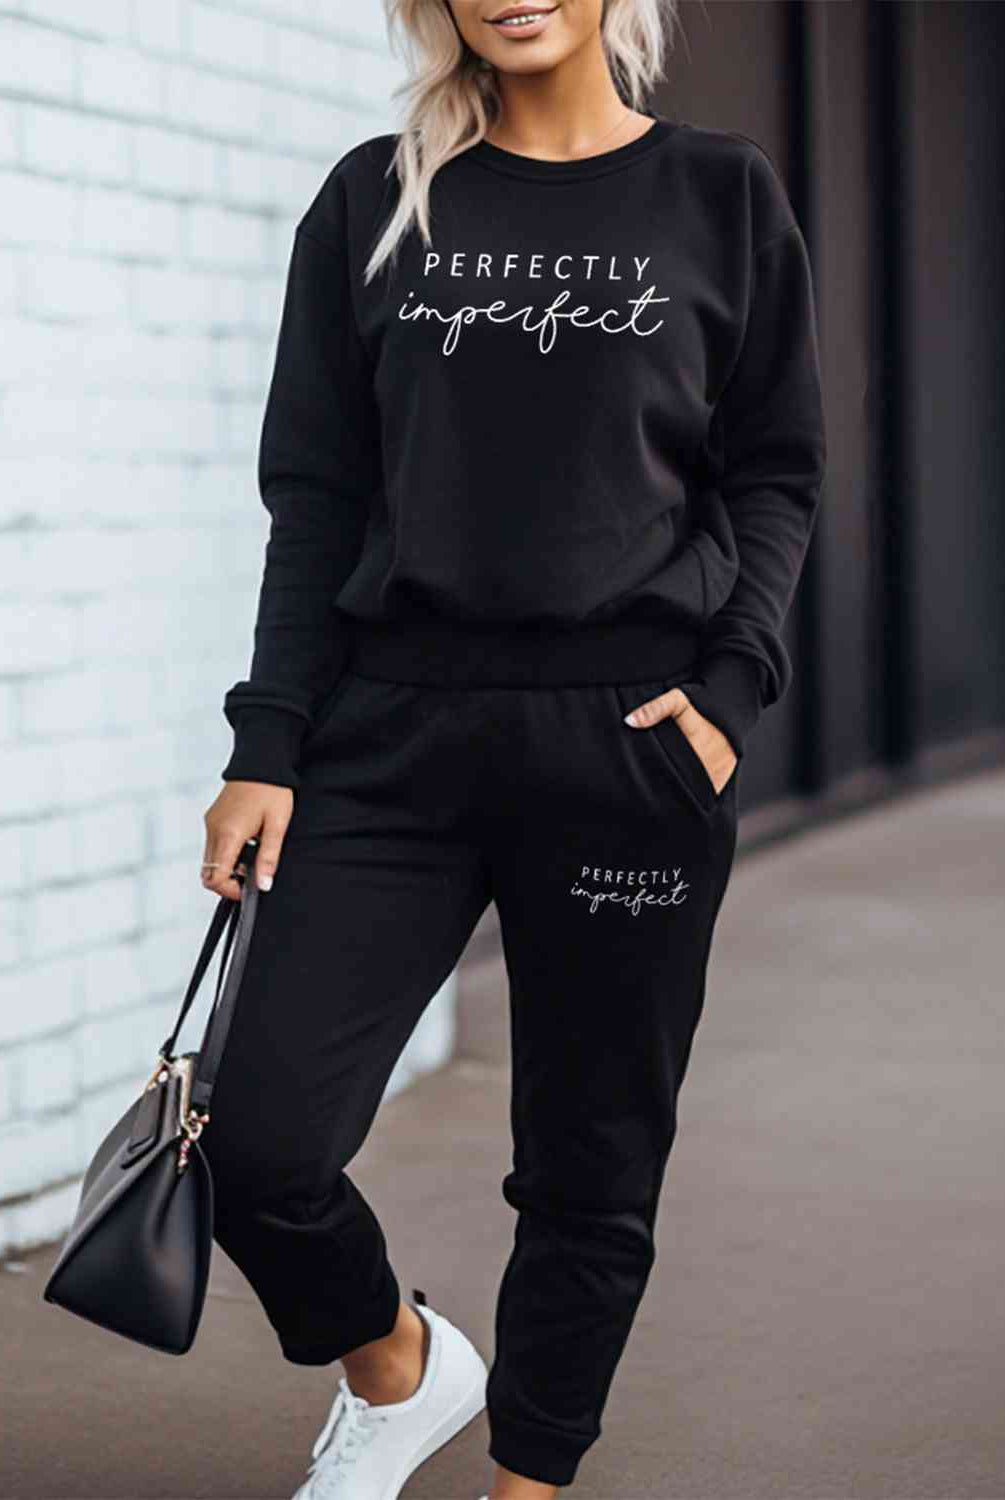 PERFECTLY IMPERFECT Graphic Sweatshirt and Sweatpants Set - GemThreads Boutique